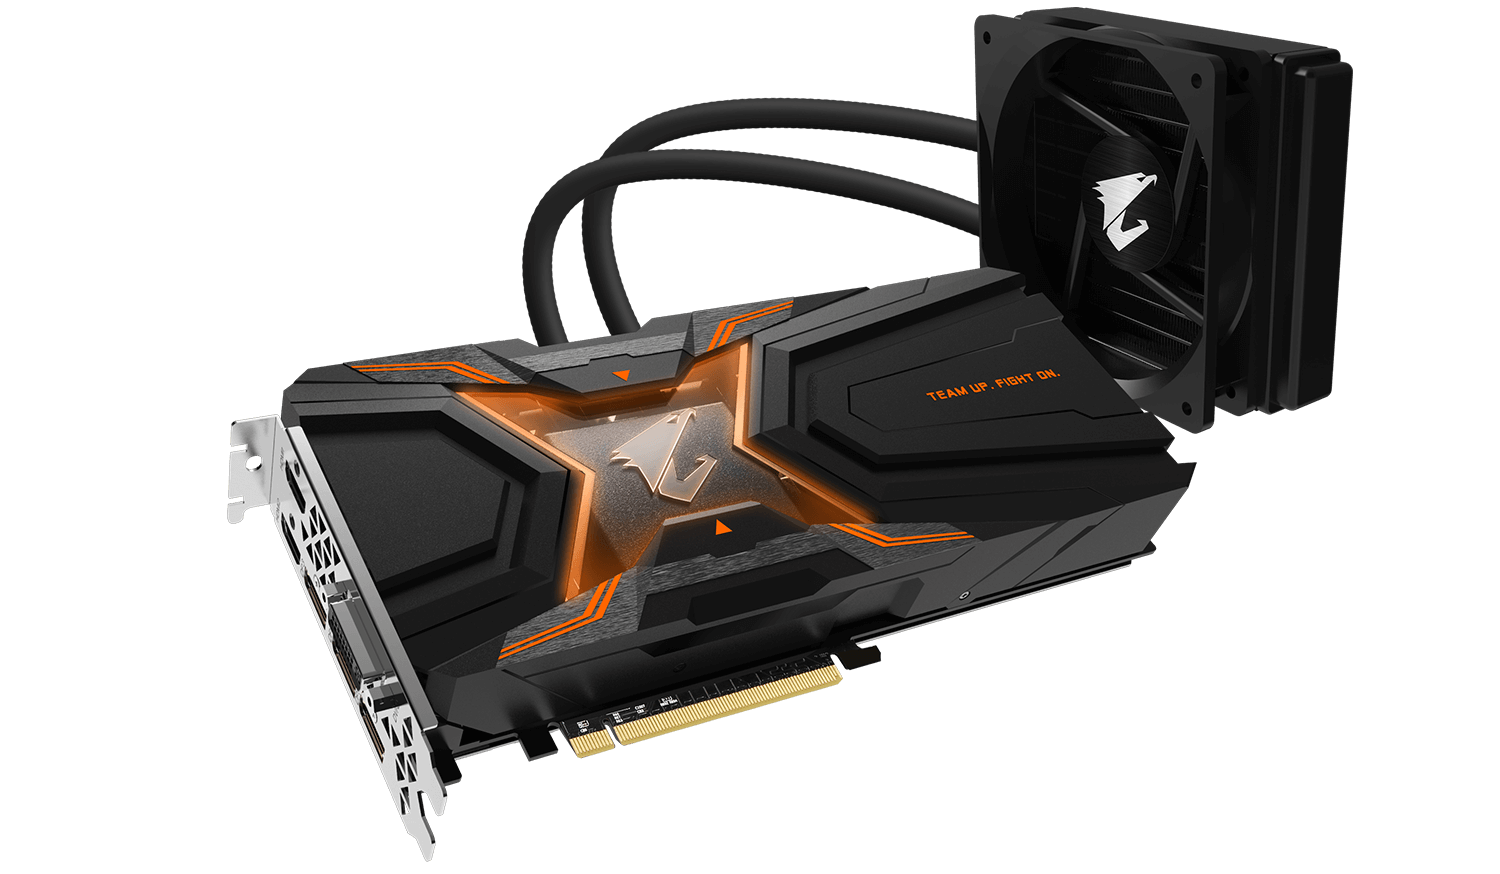 Aorus Geforce Gtx 1080 Ti Waterforce Xtreme Edition 11g Rev 1 0 1 1 Key Features Graphics Card Gigabyte Global